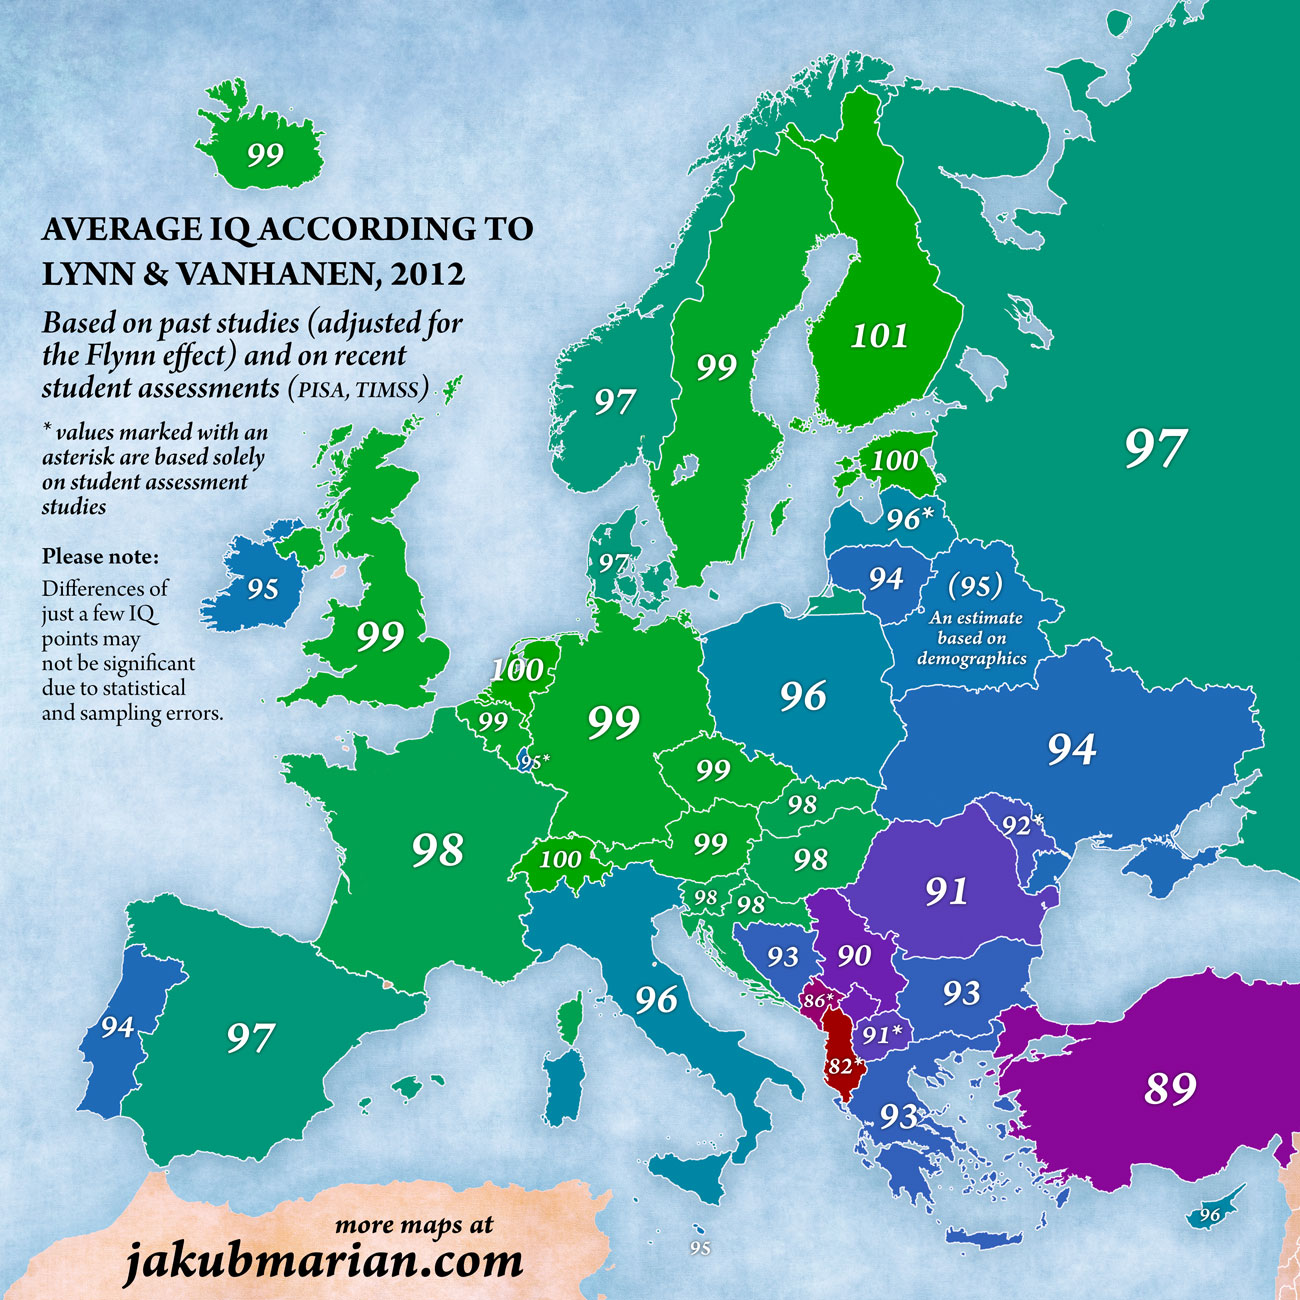 What country in Europe has the lowest IQ?